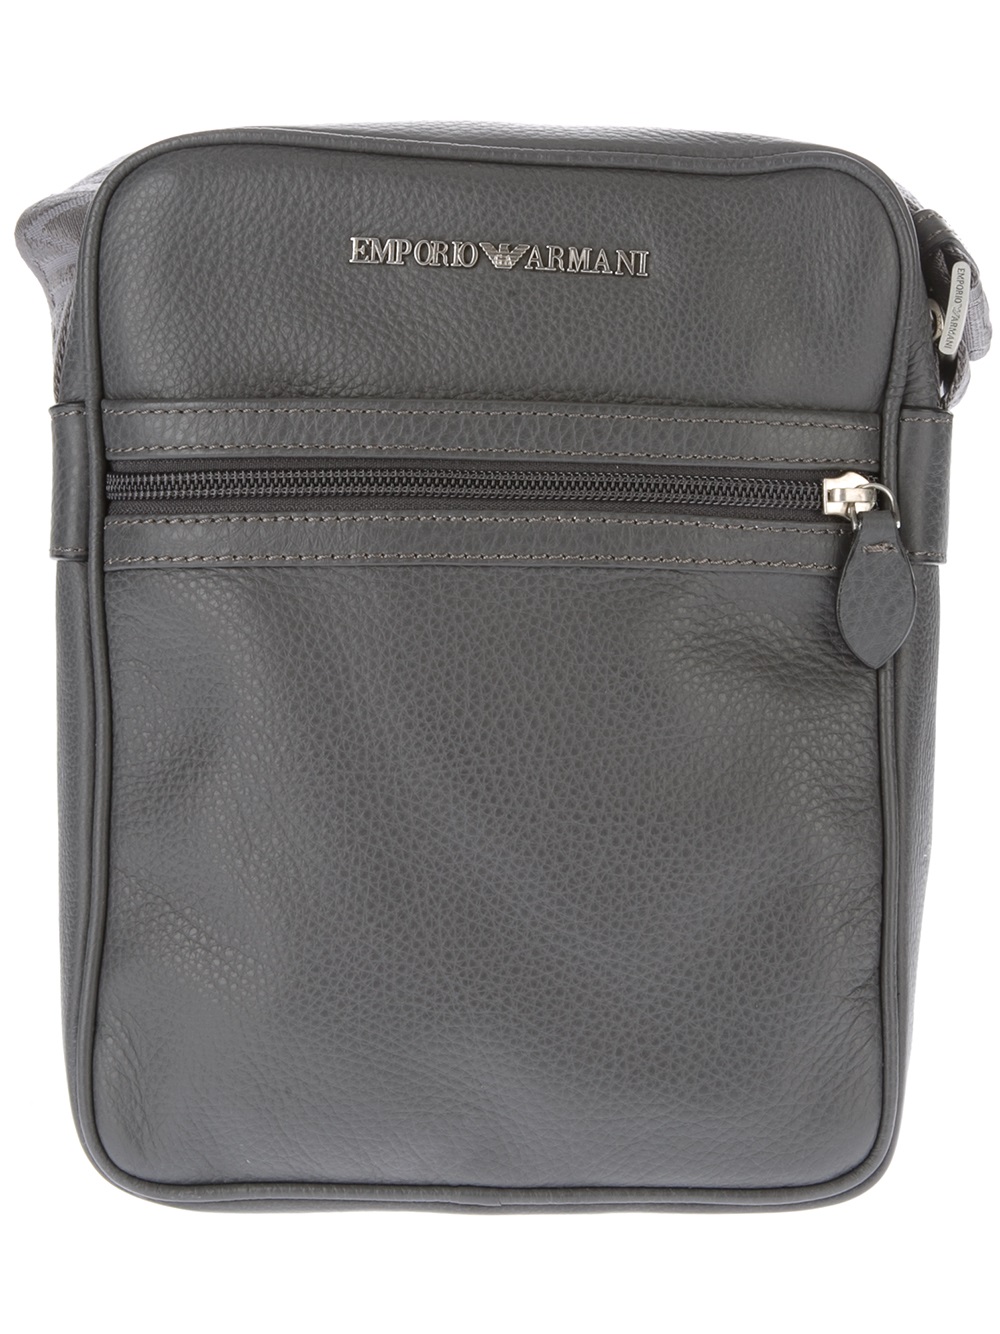 Emporio Armani Small Leather Shoulder Bag in Grey (Gray) for Men - Lyst